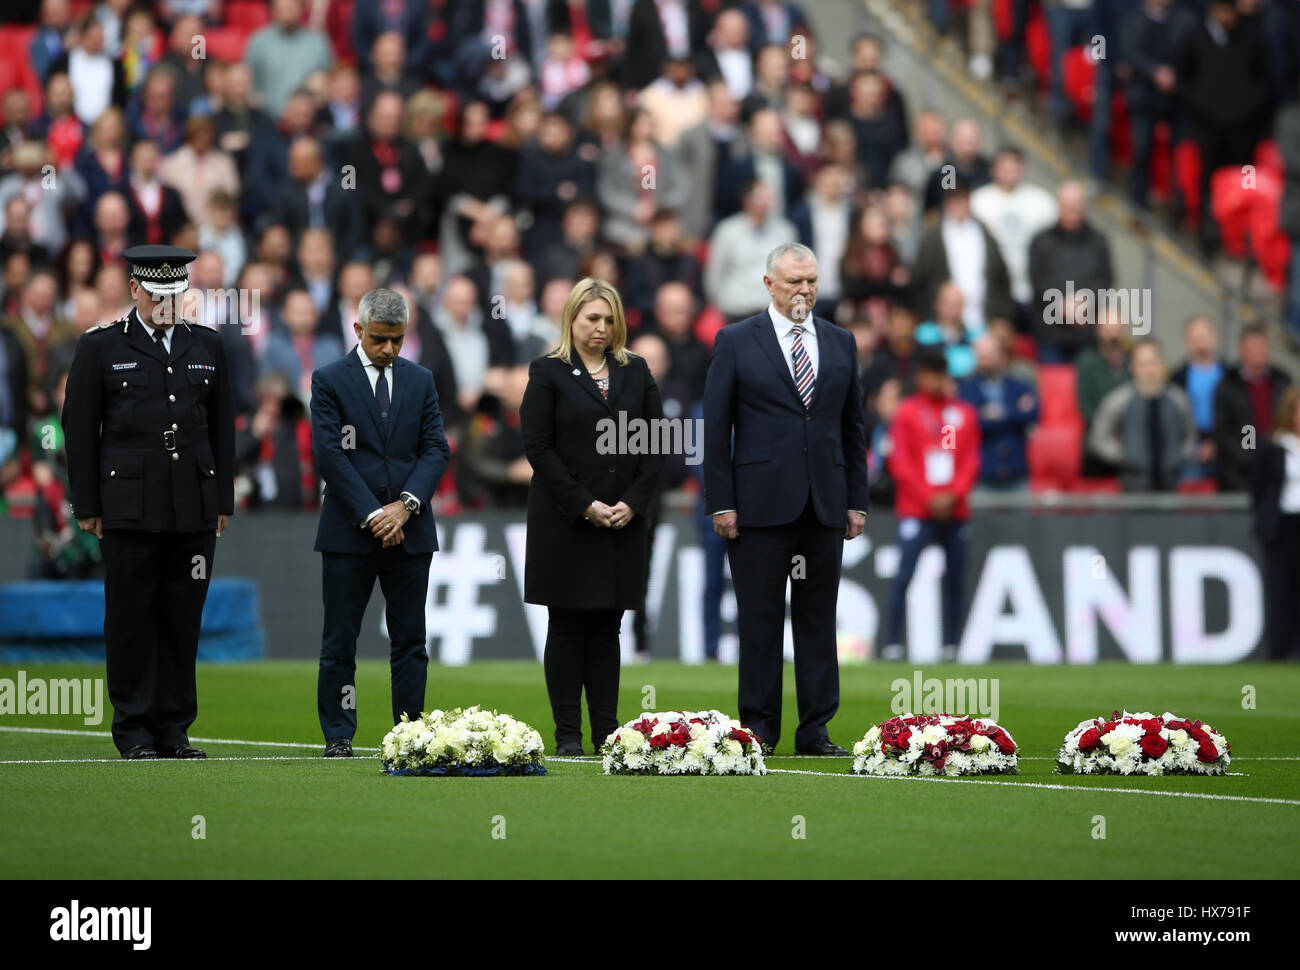 Wreathes are laid by Mayor of London Sadiq Khan, Chairman of the FA Greg Clarke, Secretary of State for Culture, Media and Sport Karen Bradley along with Craig Mackey the, acting Metropolitan police Commissioner for the victims of the Westminster terror attack before the World Cup Qualifying match at Wembley Stadium, London. Stock Photo